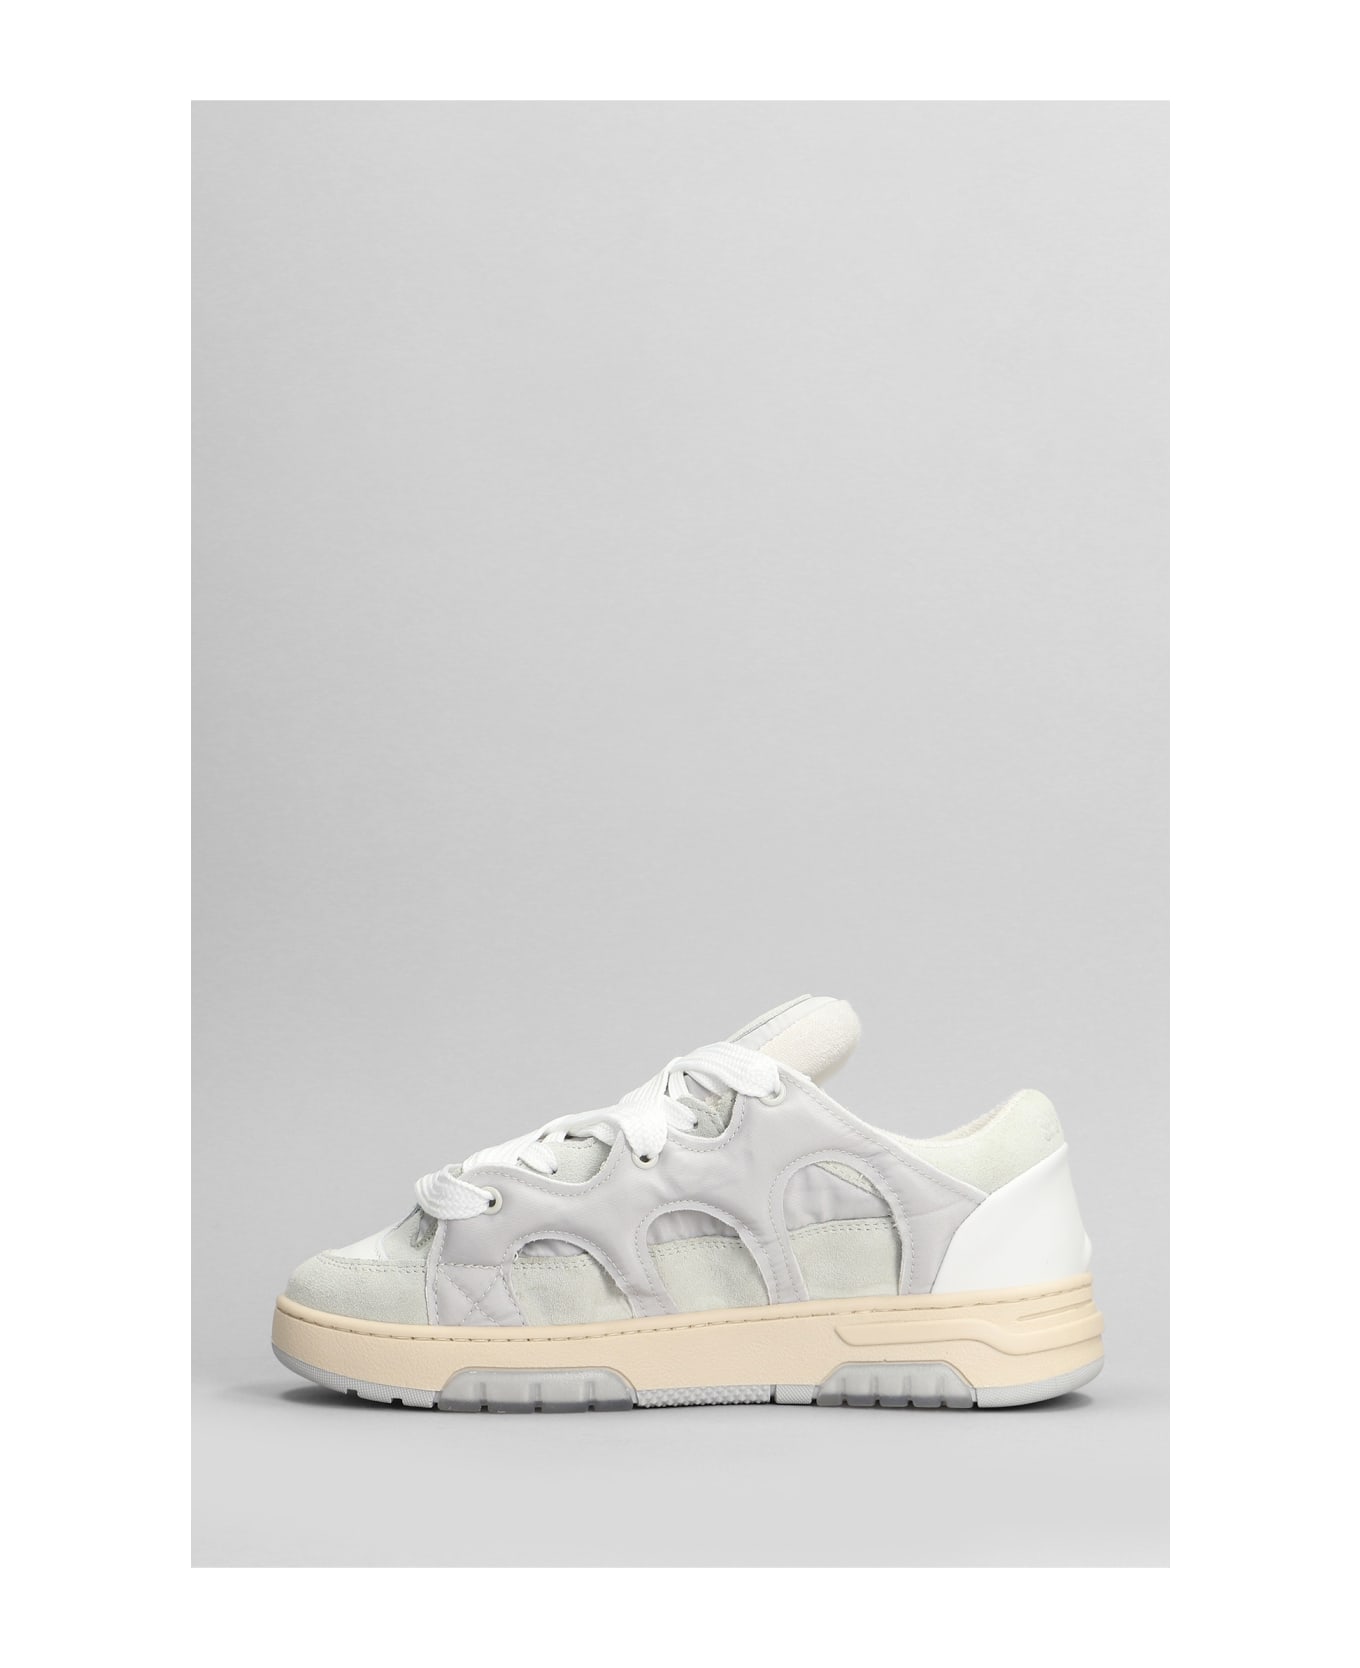 Paura Santha 1 Sneakers In Grey Suede And Leather - grey